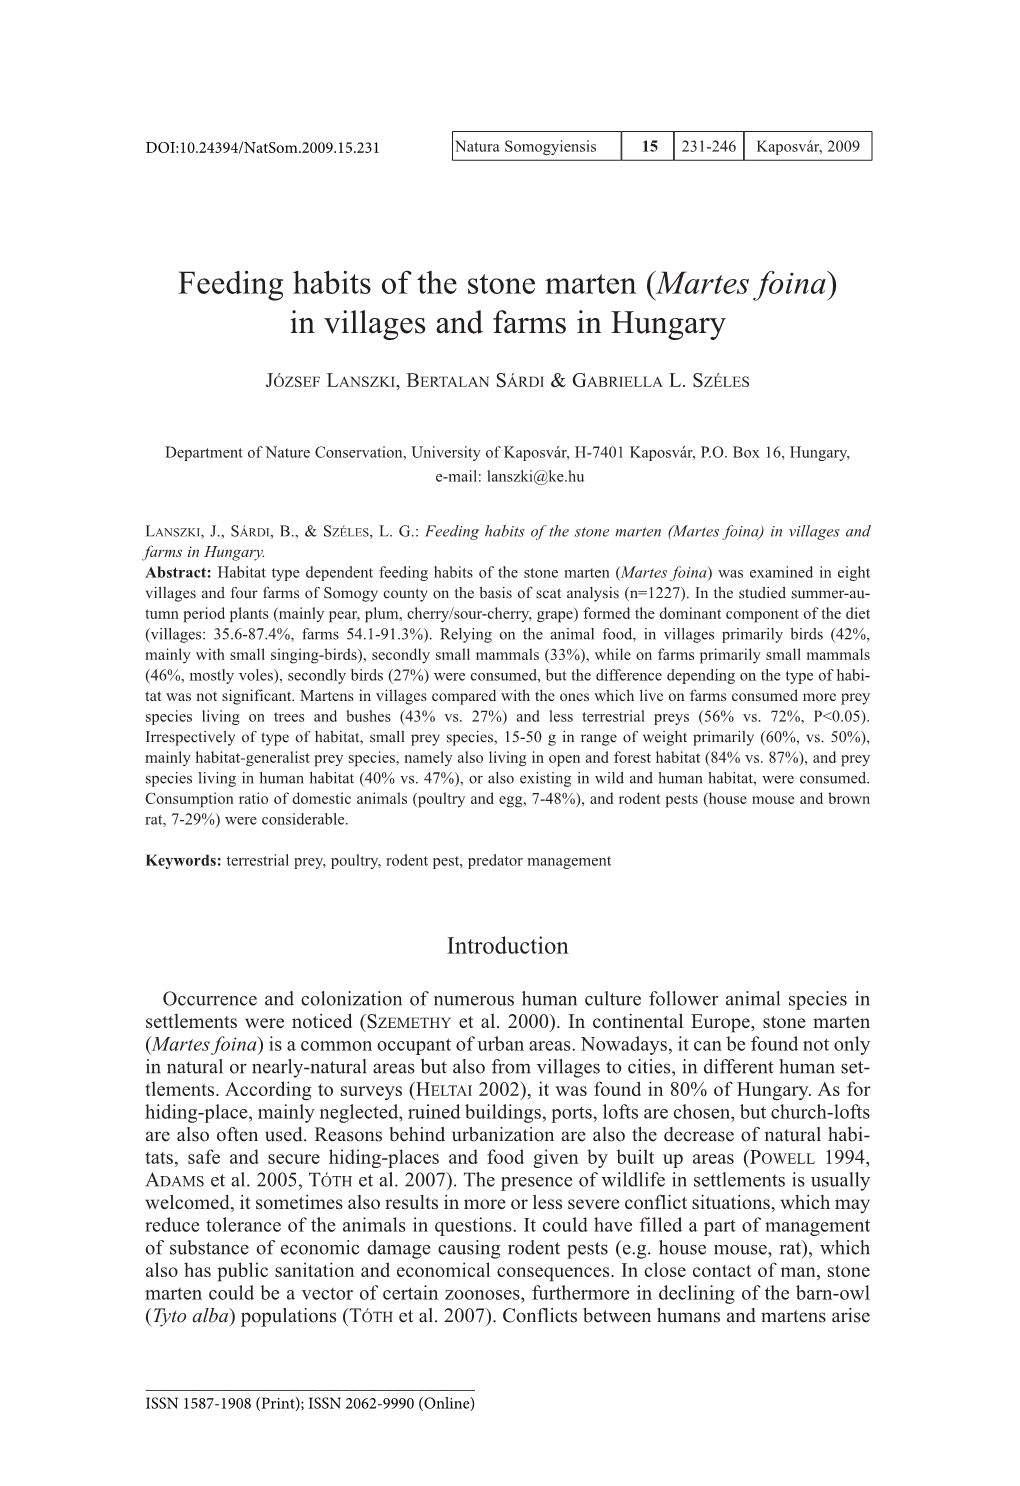 Feeding Habits of the Stone Marten (Martes Foina) in Villages and Farms in Hungary